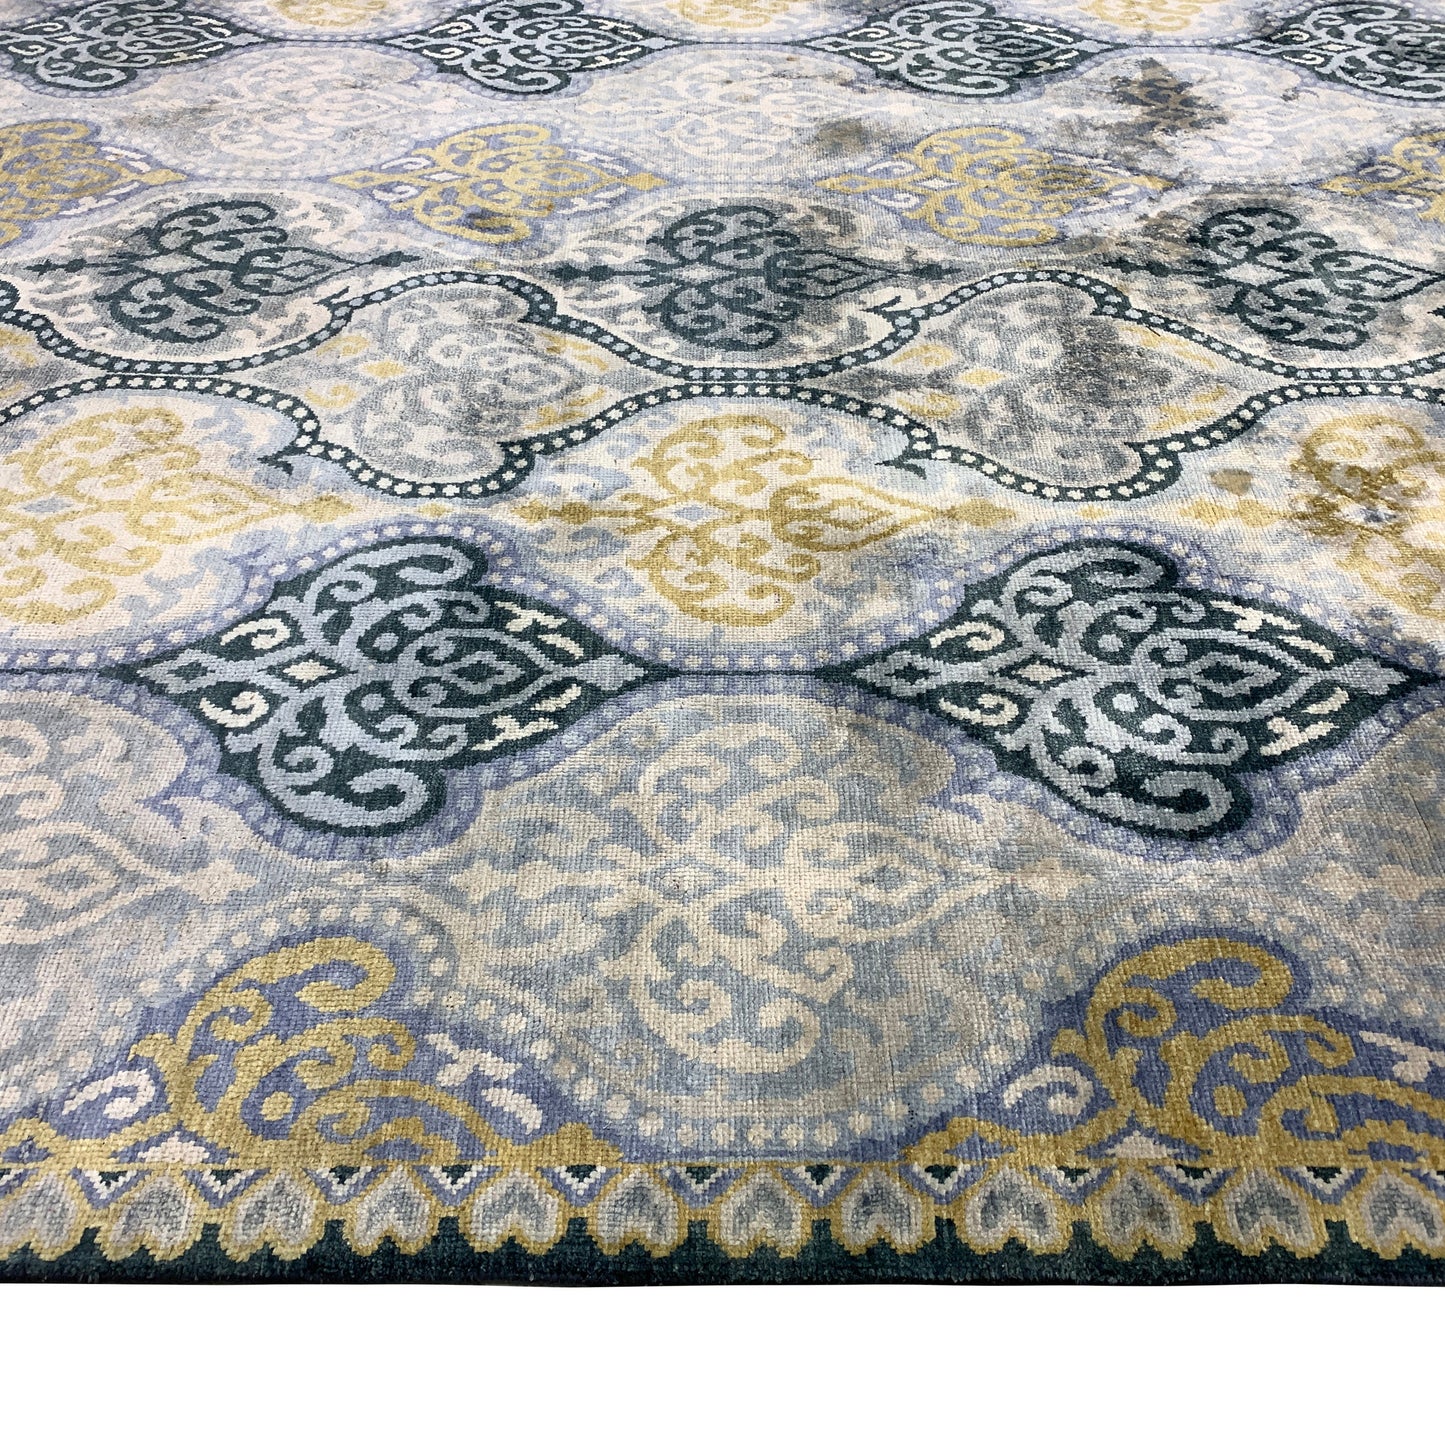 Get trendy with Wazir Light Blue, Silver Transitional Damask Handknotted Area Rug - Modern Rugs available at Jaipur Oriental Rugs. Grab yours for $5845.00 today!